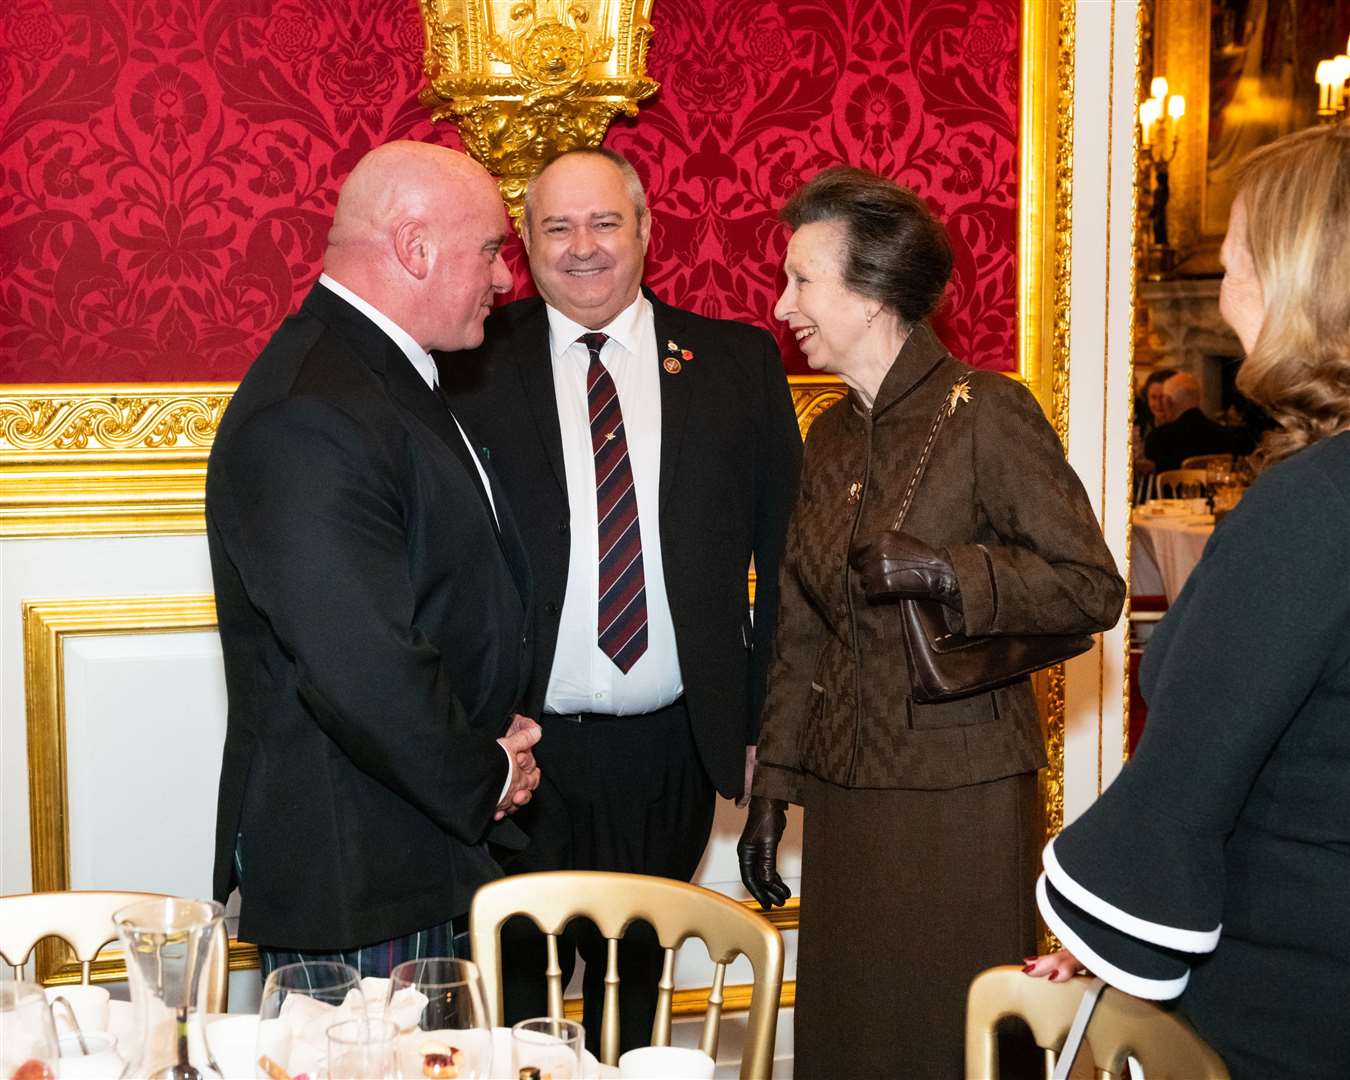 Kev Stewart chatting to Princess Anne at the event in St James's Palace.